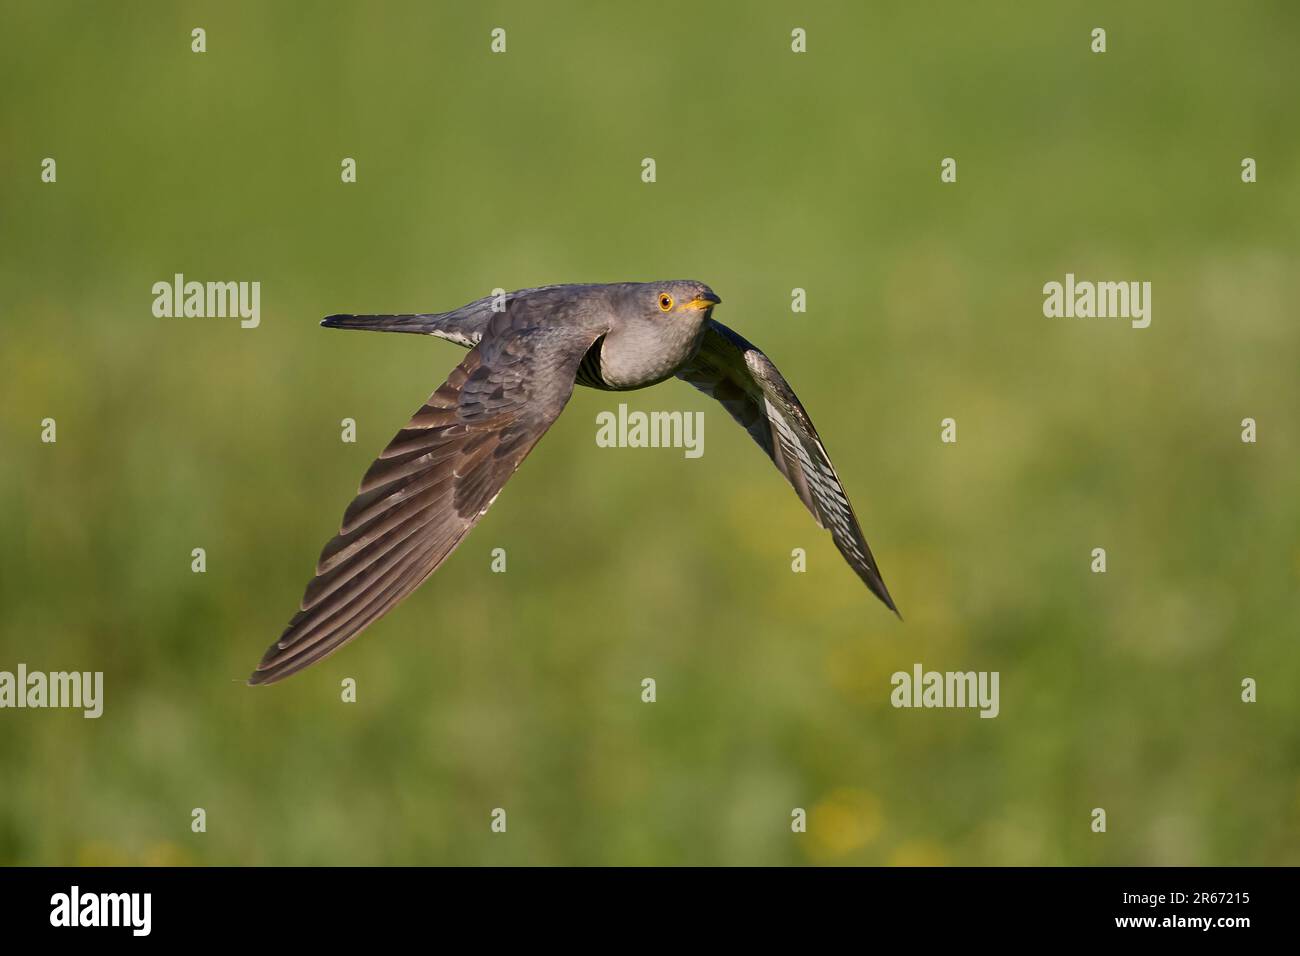 Common cuckoo (Cuculus canorus) in its natural environment Stock Photo